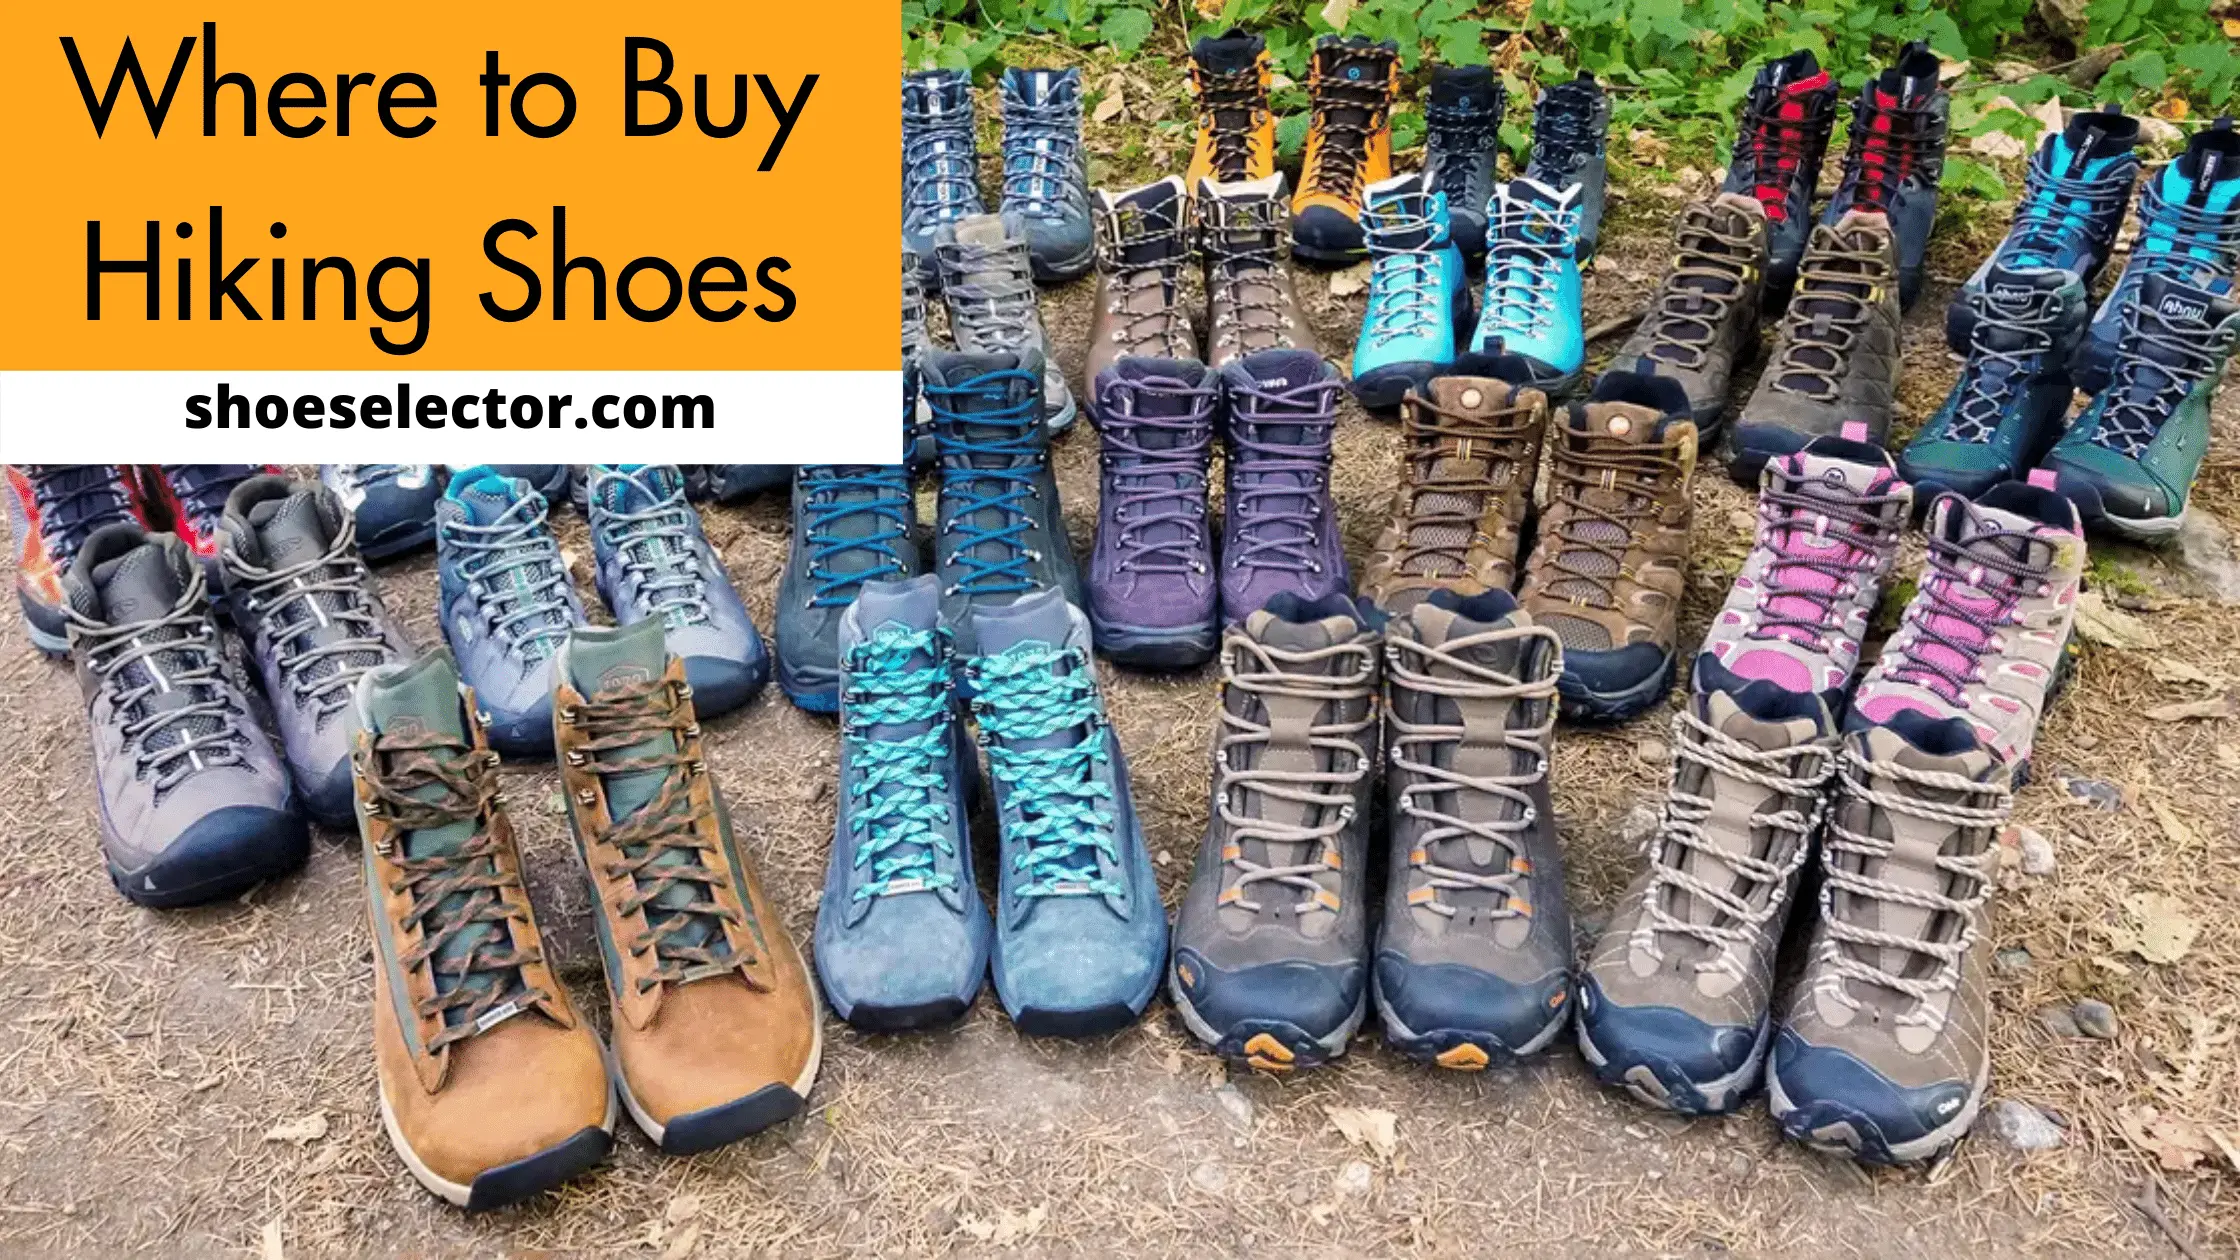 Where to Buy Hiking Shoes - Simple Guide